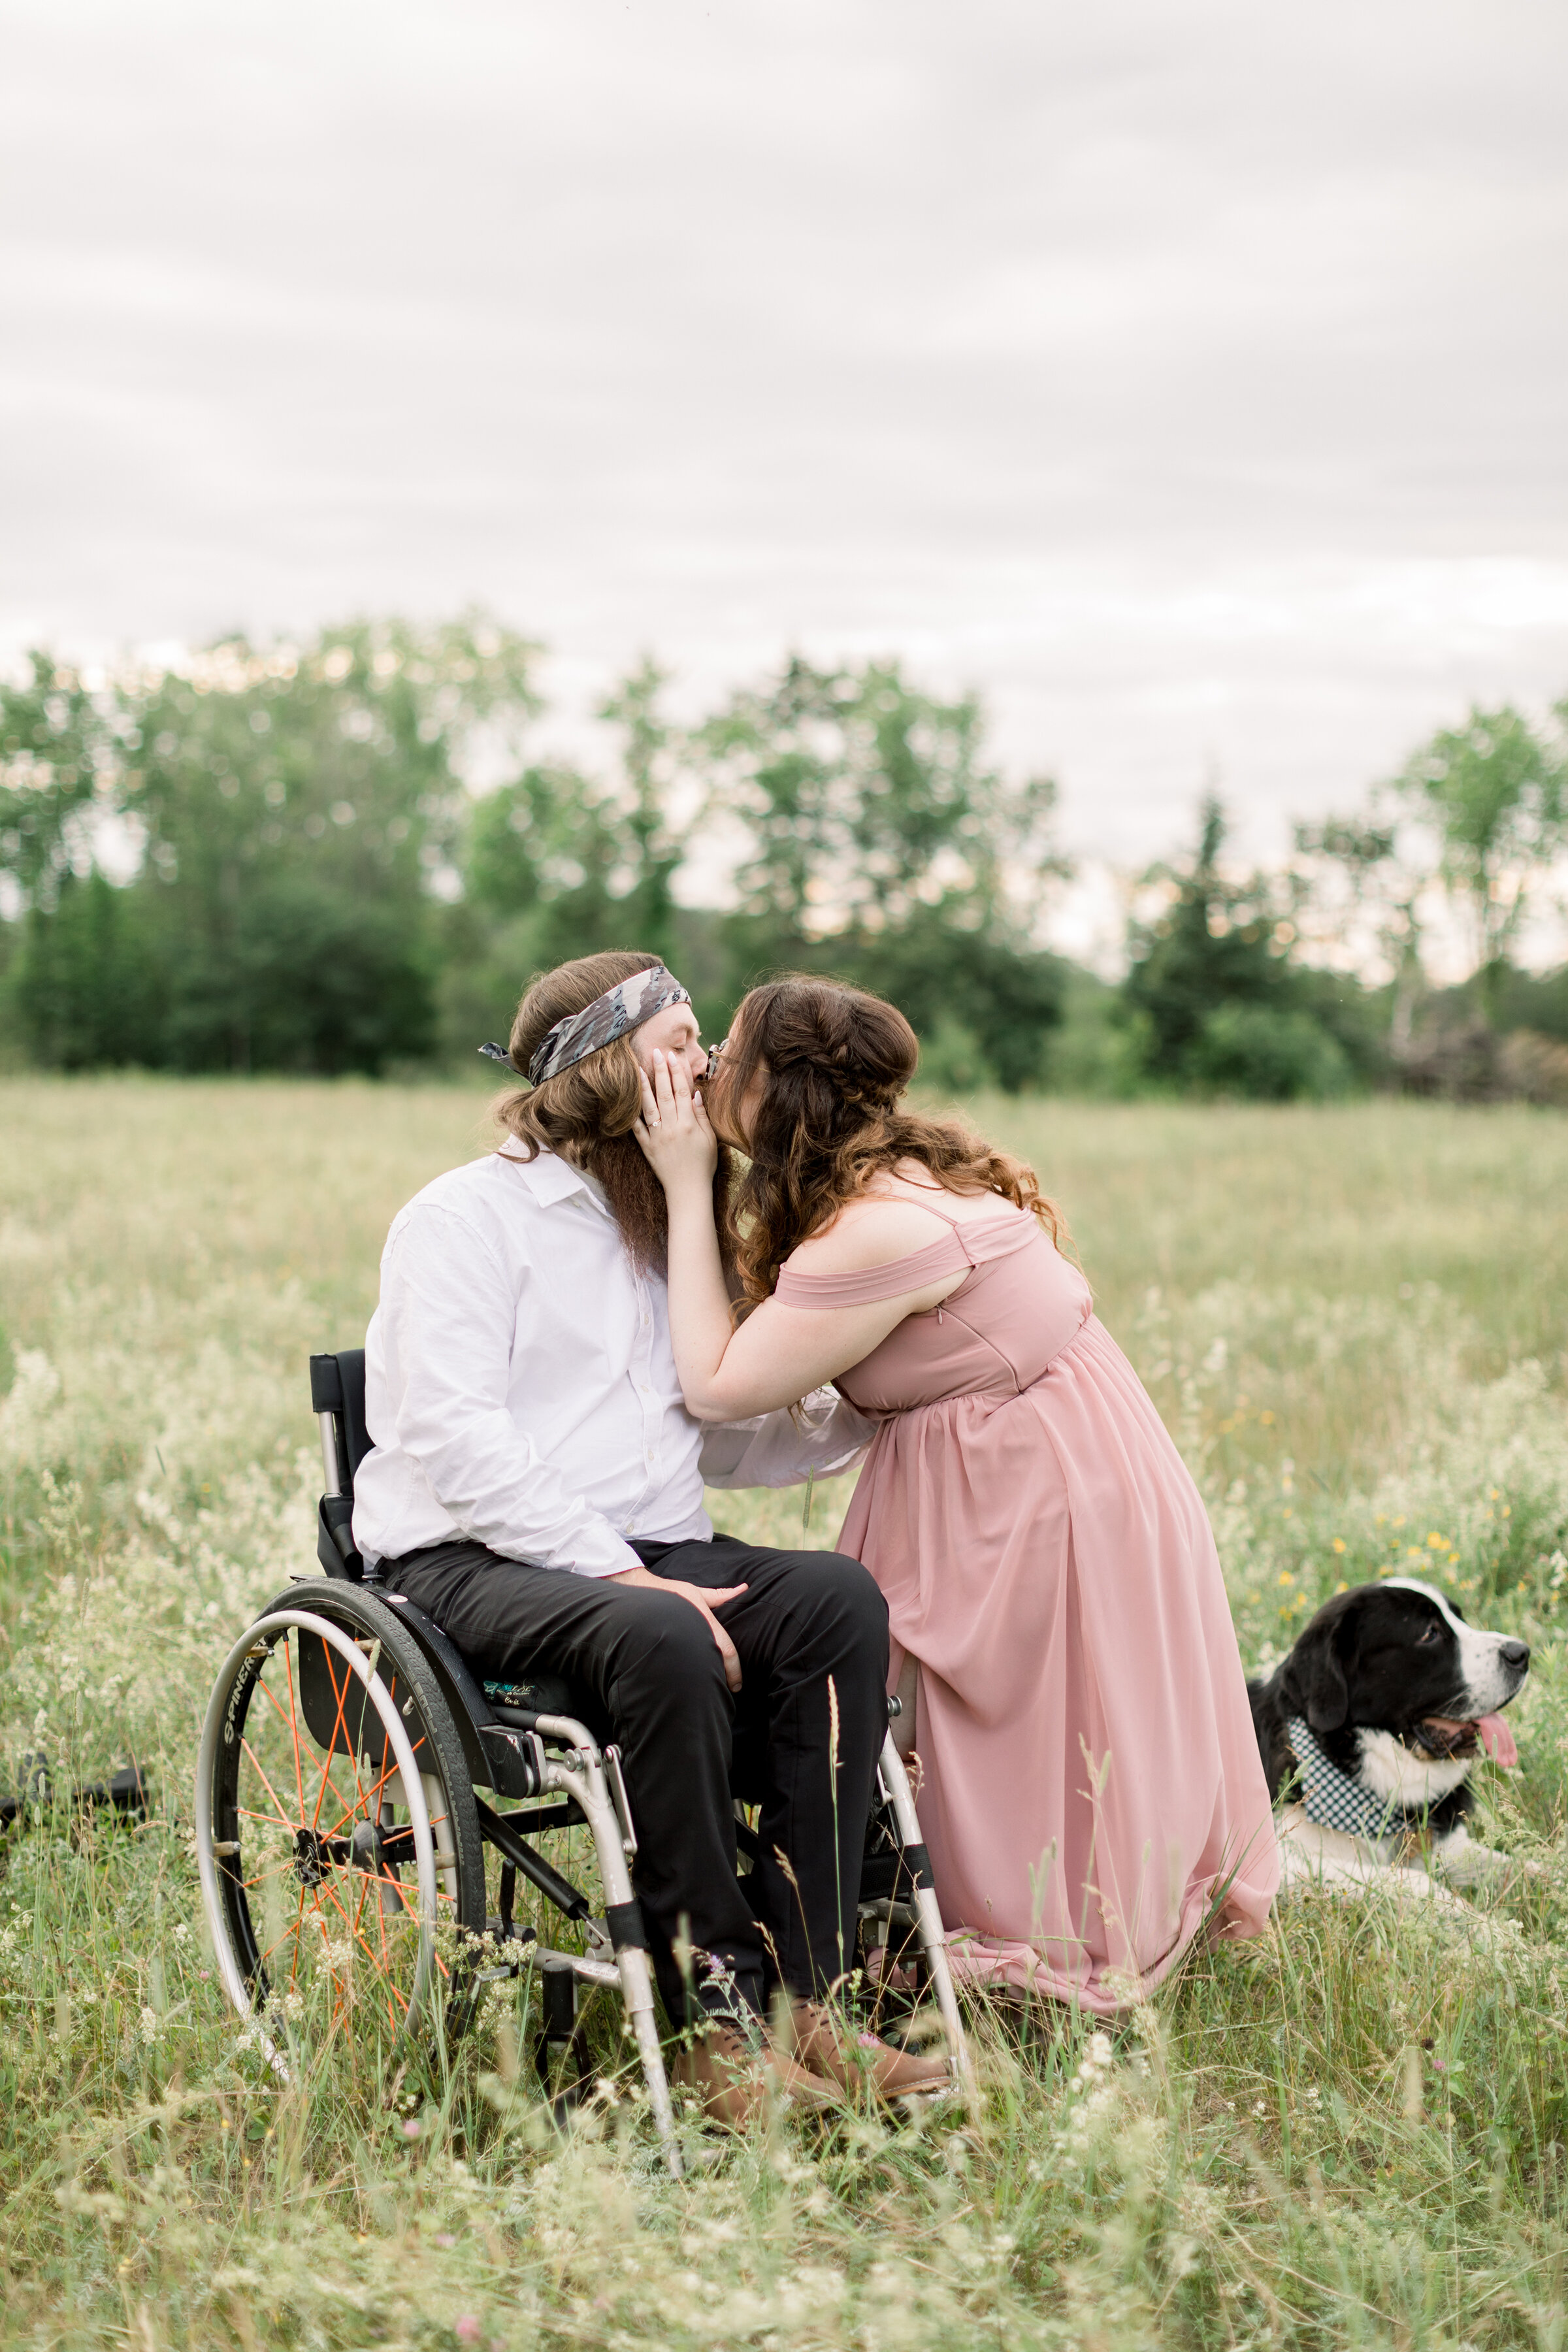  The bride to be kisses her groom in a beautiful paraplegic engagement session in Ontario Canada.  Couple pose with dog inspiration outdoor photo shoot session inspiration ideas and goals client attire inspiration couple pose with one sitting off the